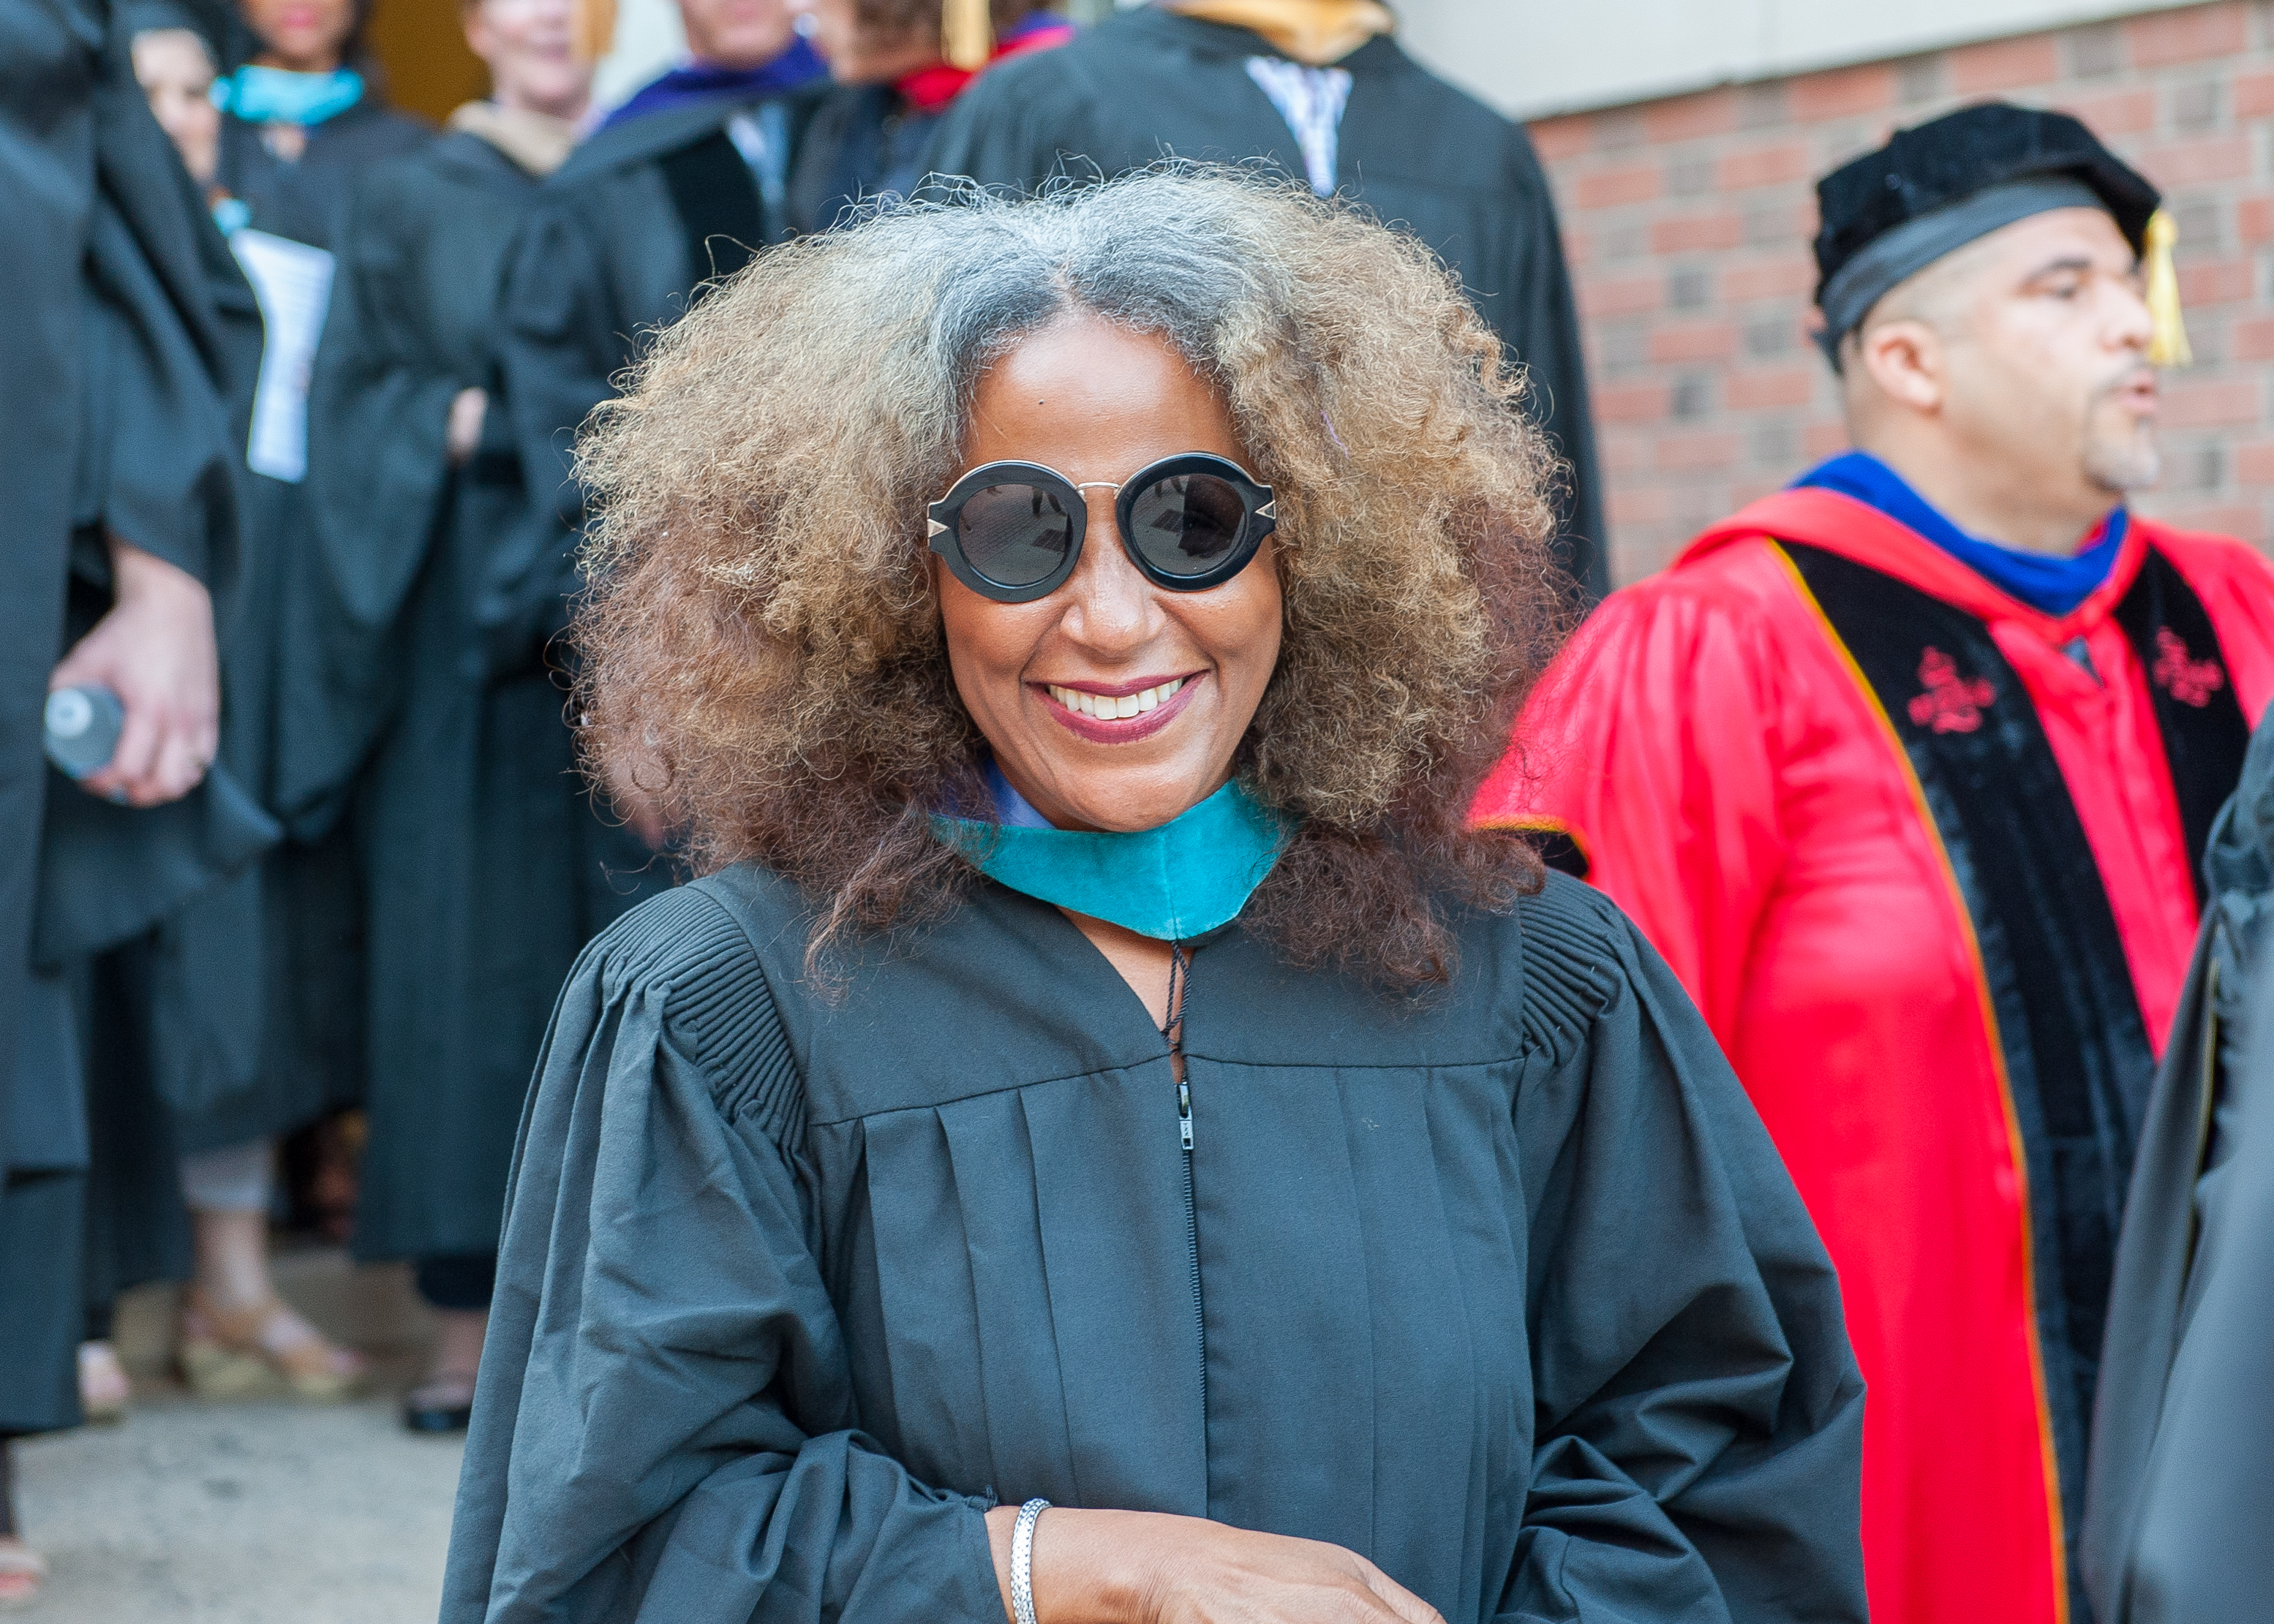 Commencement speaker Benilde Little before the ceremony. Photo by Scott Kennedy for The Montclair Dispatch.